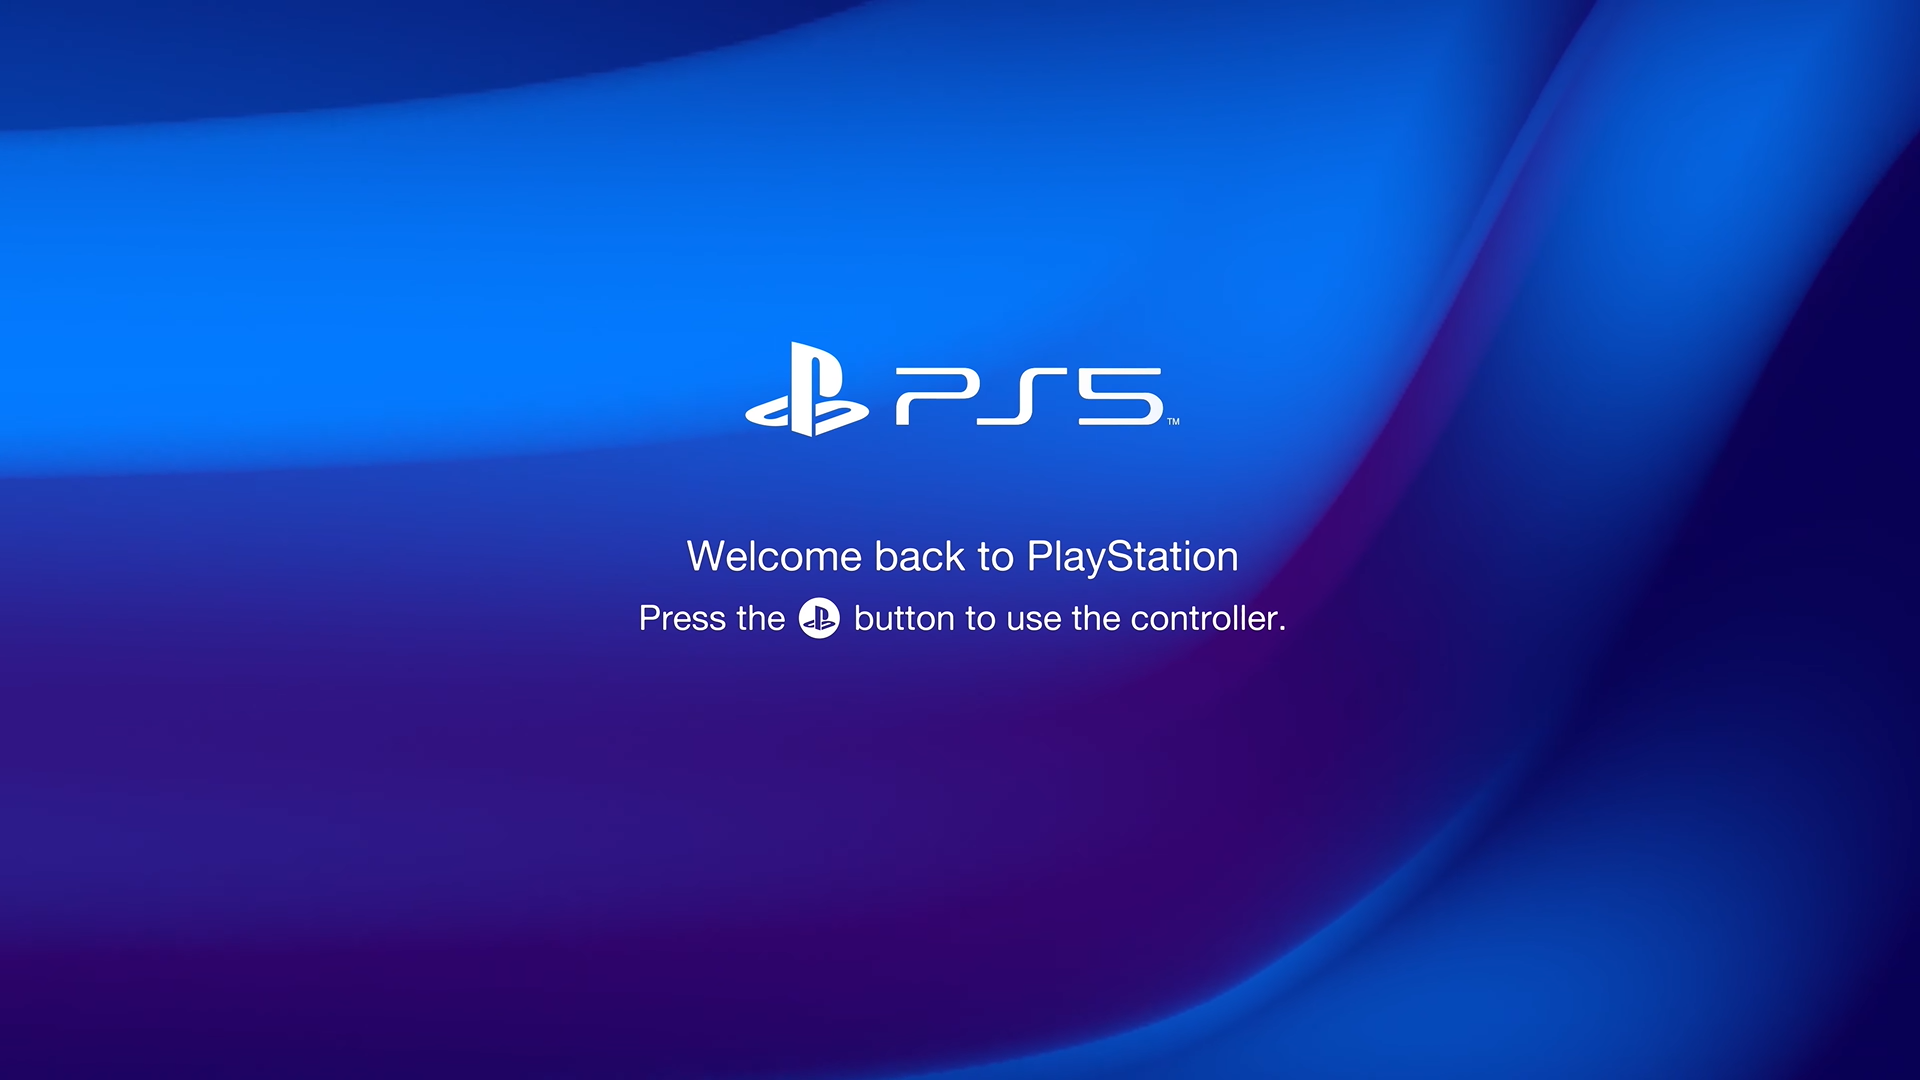 PS5 PlayStation 5 PS PS4 boot screen concept art fan video new Sony Console Next Gen